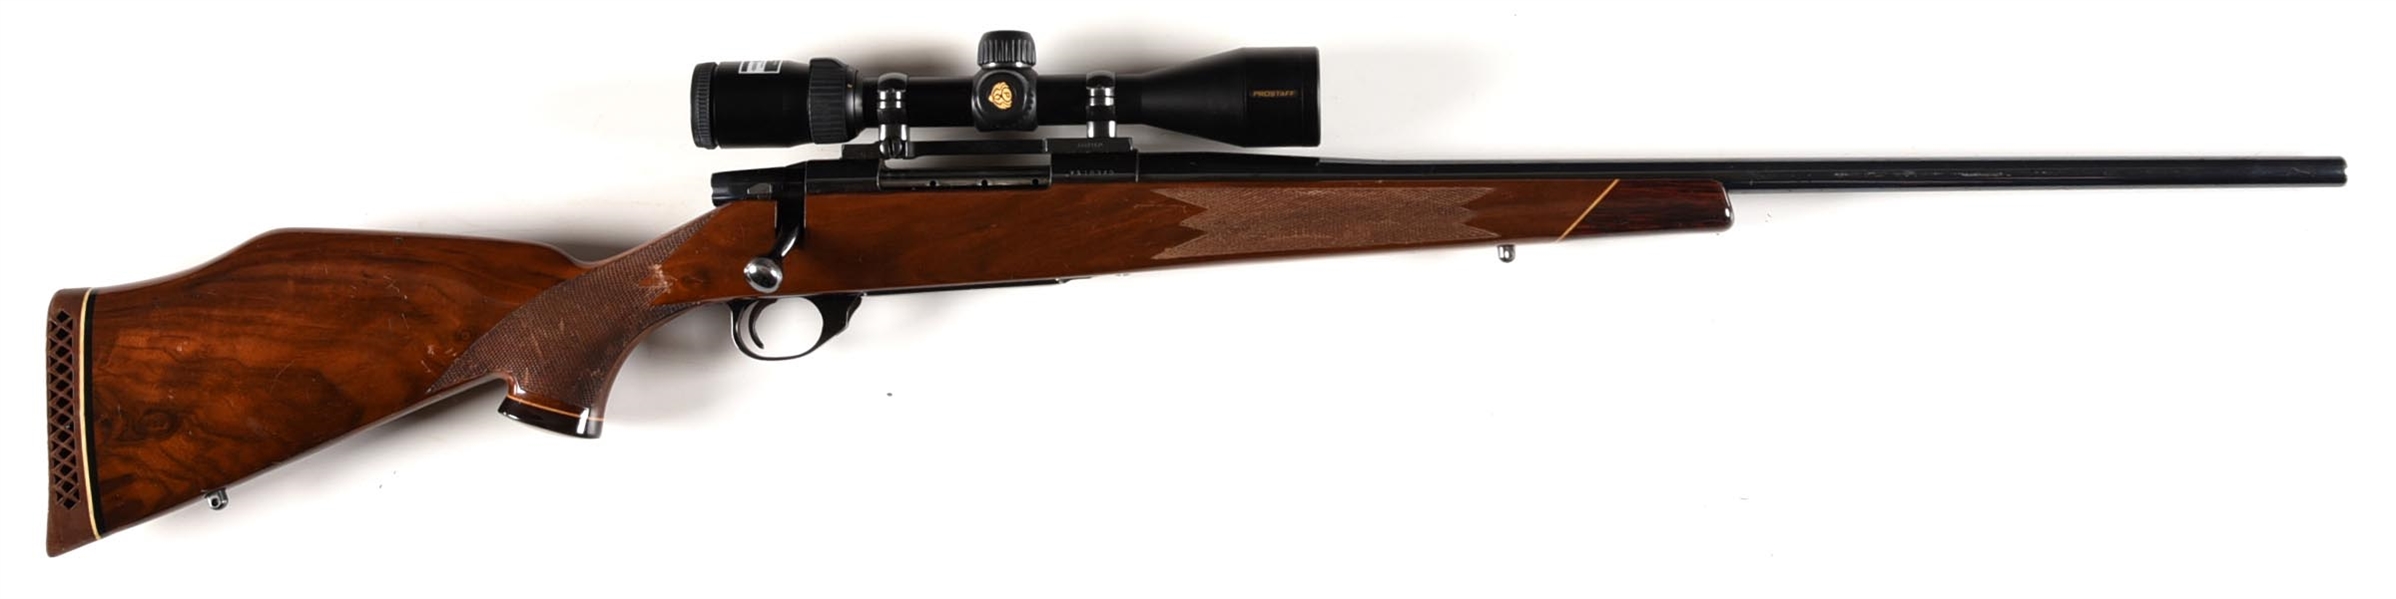 (M) WEATHERBY VANGUARD VGX BOLT ACTION RIFLE WITH NIKON SCOPE.